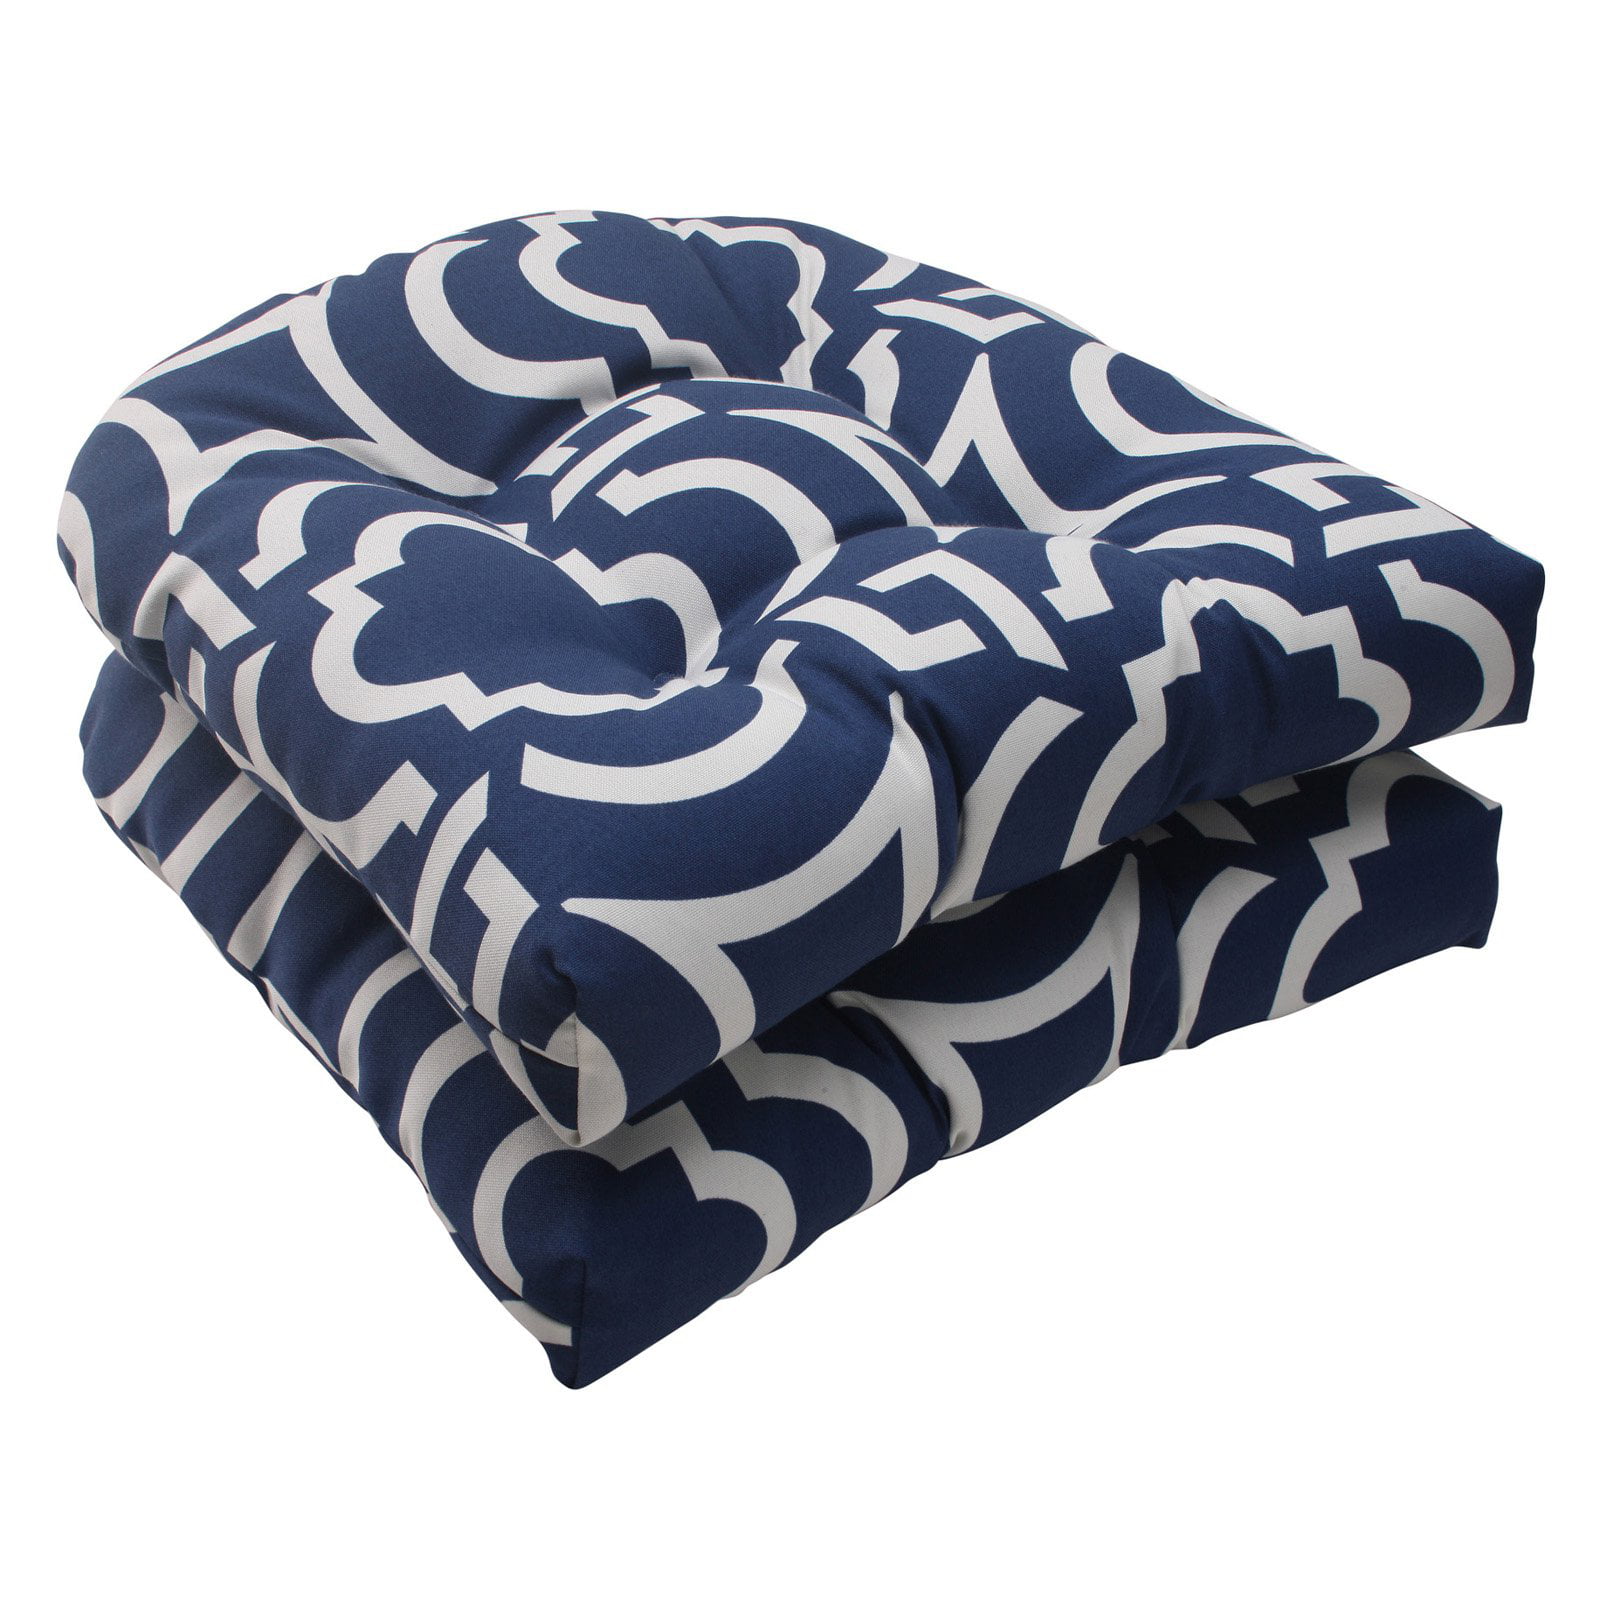 Made USA Outdoor/Indoor Pretty Wicker Seat Cushion Seat Pad Set of 2 Navy Blue